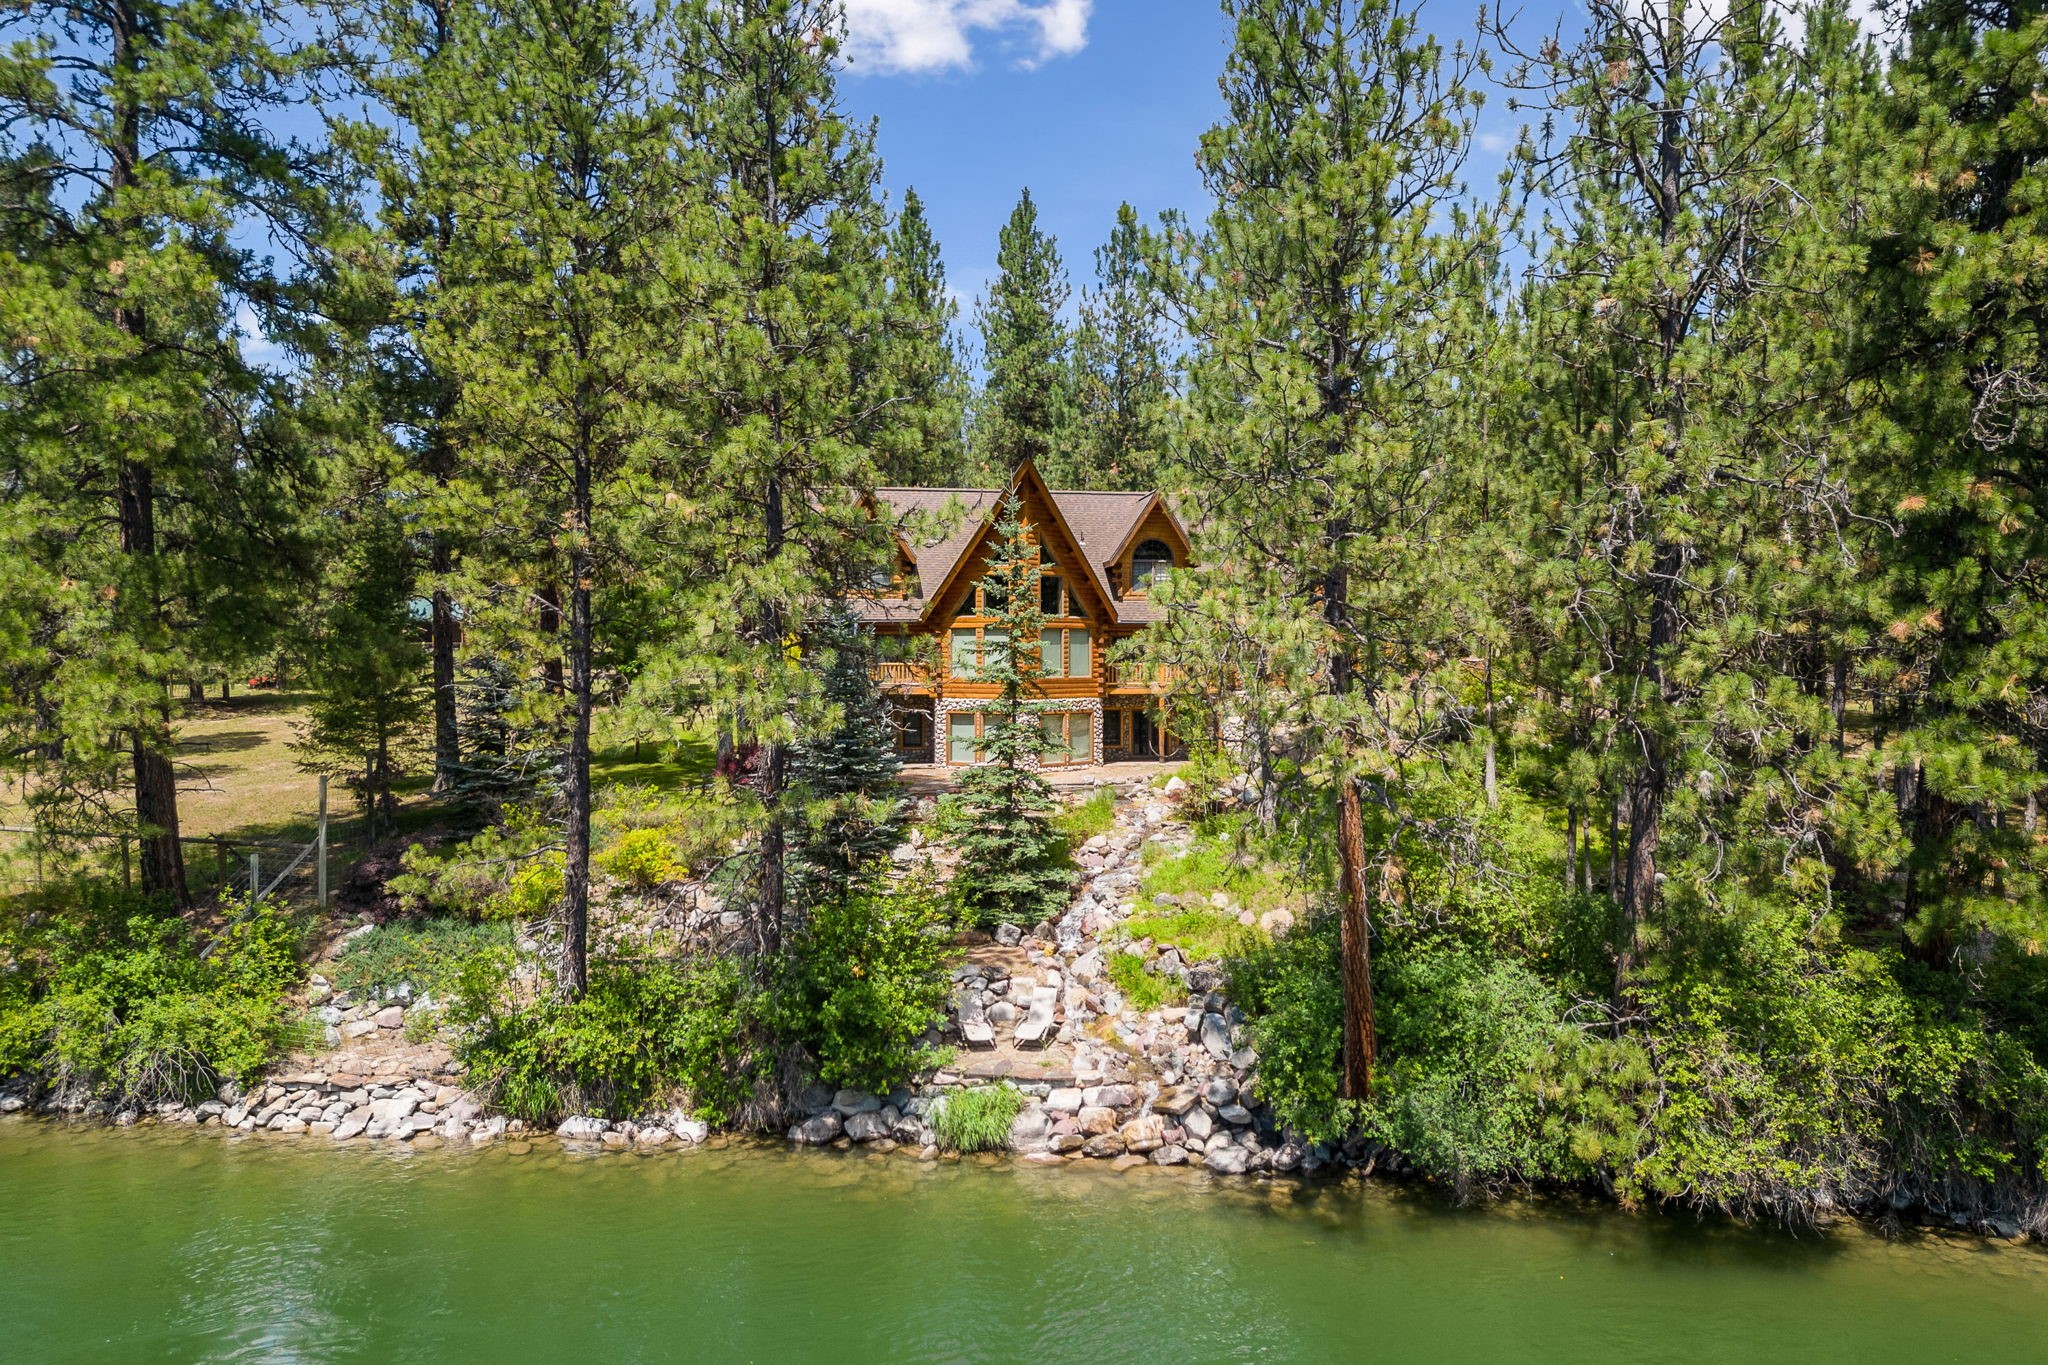 Imagine a majestic log home that truly encapsulates the heritage and spirit of Montana – tall pine trees, breathtaking mountain views, and the slow-rolling Clark Fork River. If you’ve been searching for the perfect Montana property, we’d like to welcome you to 64 Steamboat Way - on 3.45 acres and almost 400 feet of river frontage - in the quiet and picturesque town of Thompson Falls, Montana. 

Featured in Log Homes Illustrated for its custom grandeur, this show-stopper sits on the banks of the Clark Fork River. Nearly every window provides a tranquil river view in this 6400-square-foot D-Style mountain log sanctuary. The heart of the home is adorned with a floor-to-ceiling river-rock fireplace and a large, family, eat-in kitchen accented with an antique stove.  The main floor is enclosed with white pine logs, and the interior doors are Amish made – extra wide and 2” thick. Vaulted ceilings and cozy lofts throughout offer open, breathtaking views and quiet places to watch the river – and all the birds and fish that call the river “Home.”

The main floor features a warm and inviting owners’ suite, with river views that make it seem like a vacation resort. The generous owners’ bath boasts a steam shower. Upstairs, two welcoming guest rooms bookend a spacious and relaxing loft area that overlooks the meandering Clark Fork and the whispering pines.

One of the home’s most unique surprises is “the doghouse” – the original owner’s name for the approximately 40x26 foot Bonus Room, complete with bathroom and kitchenette. This area makes an exceptional getaway for guests, a hobby room, or space for adult kids, extended-stay guests, or other family members.

Speaking of exceptional getaways, they are in abundant supply at 64 Steamboat Way. You can choose to luxuriate in the property’s Butchart Garden-like landscape, the log gazebo on the river, the hot tub, or on the river bank.  The quaint little guest cabin has a Jeremiah Johnson vibe to it – you can almost hear and see all of civilization disappear when you walk through the door. Wherever you decide to relax on this property, you’ll be surrounded by the serene peace only found in a true Montana setting like this one.